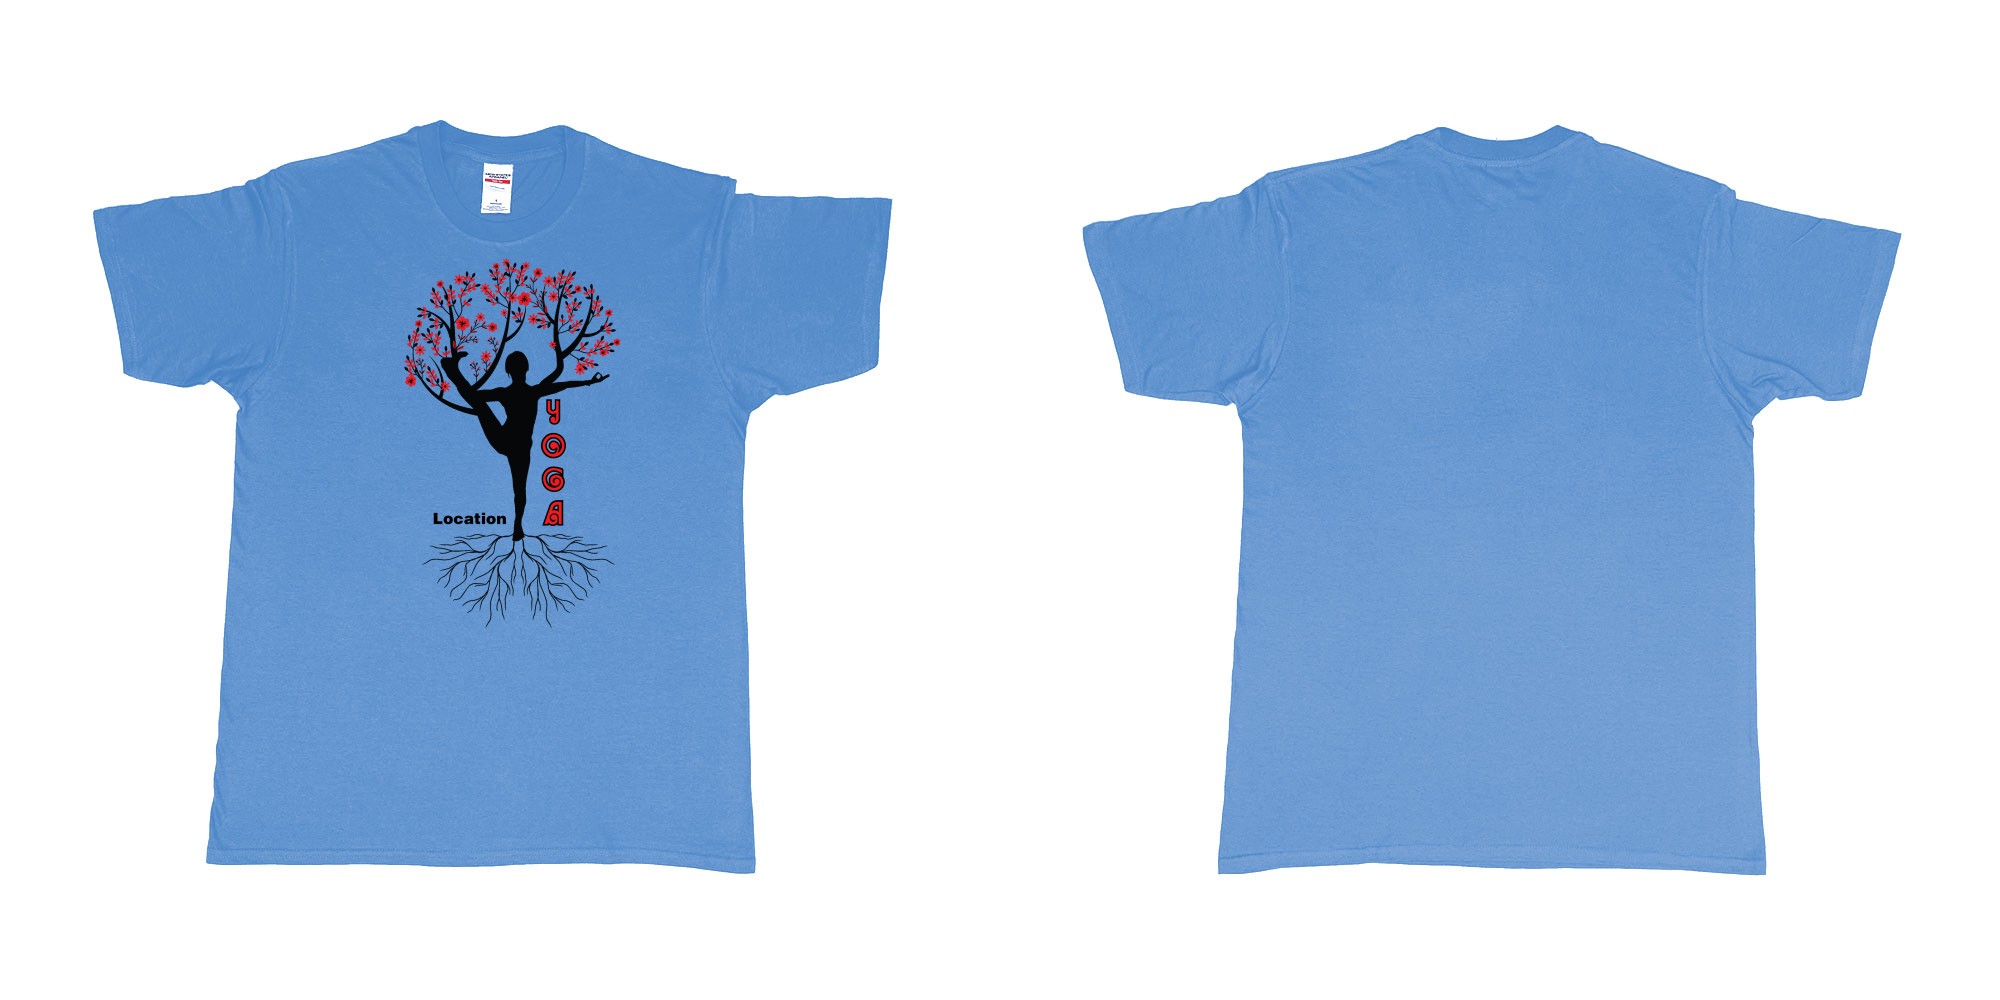 Custom tshirt design yoga tree of life is blooming own logo location design in fabric color carolina-blue choice your own text made in Bali by The Pirate Way